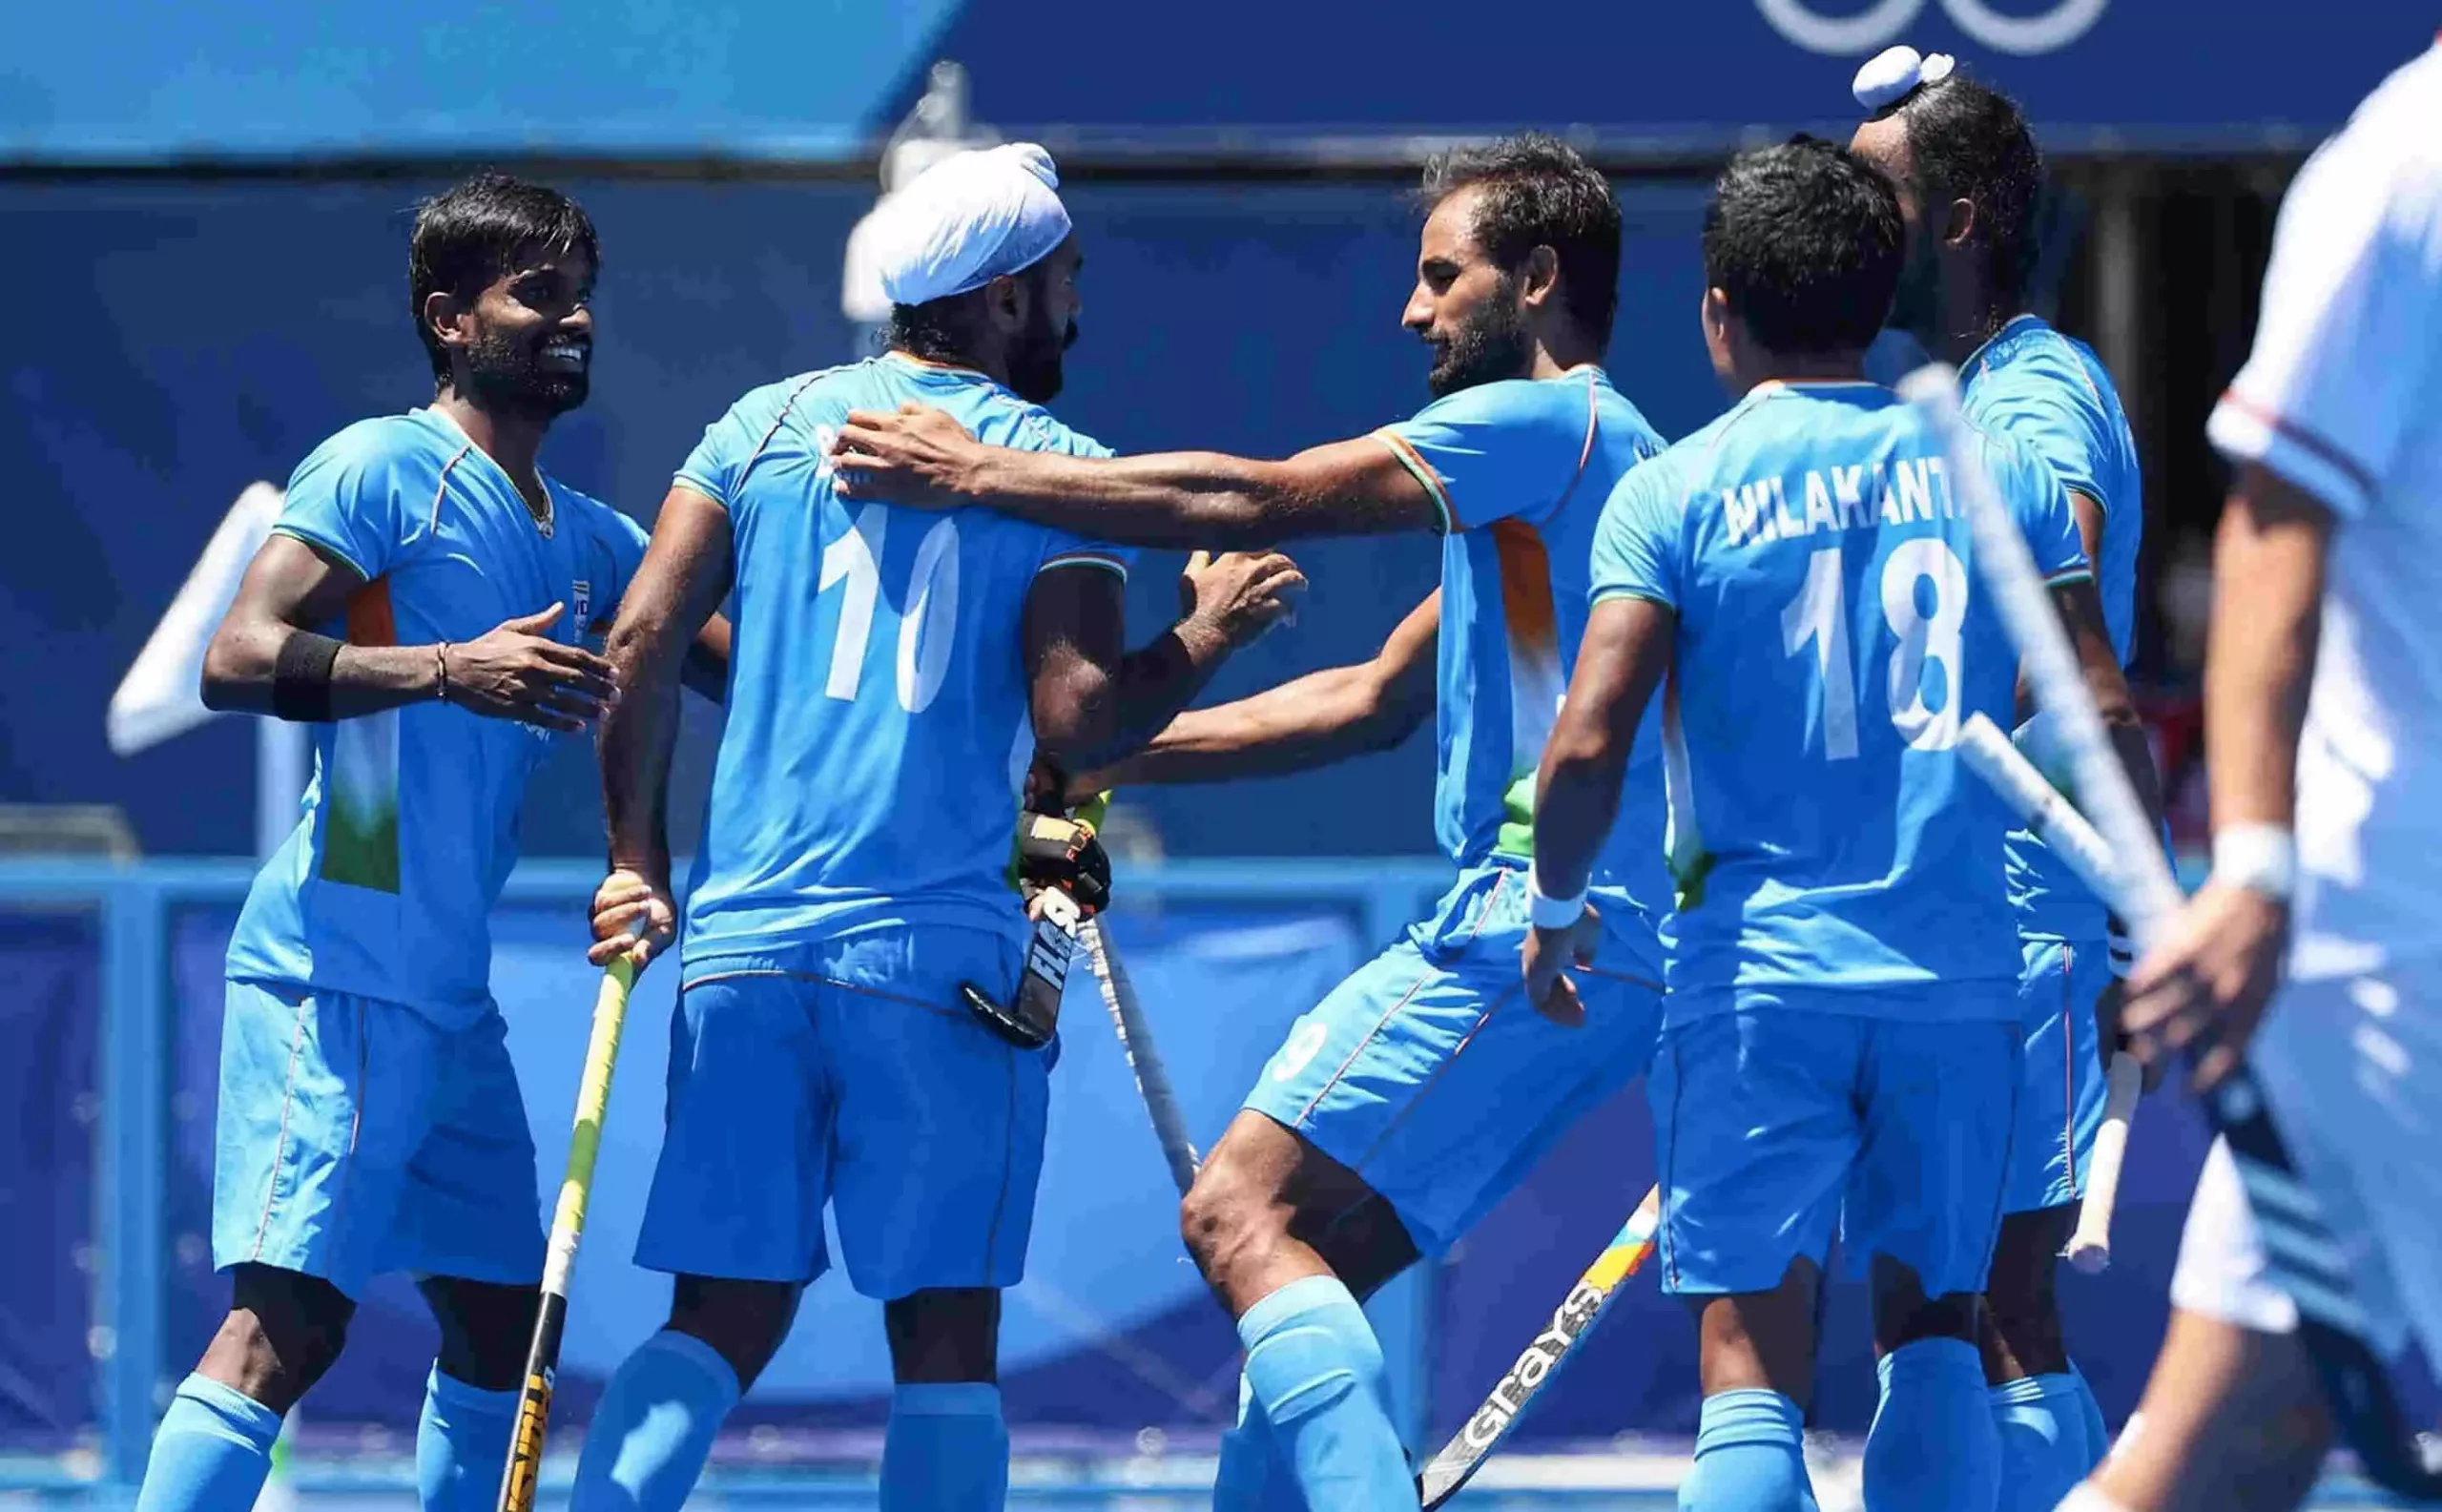  Men’s Asian Champions Trophy upcoming matches details